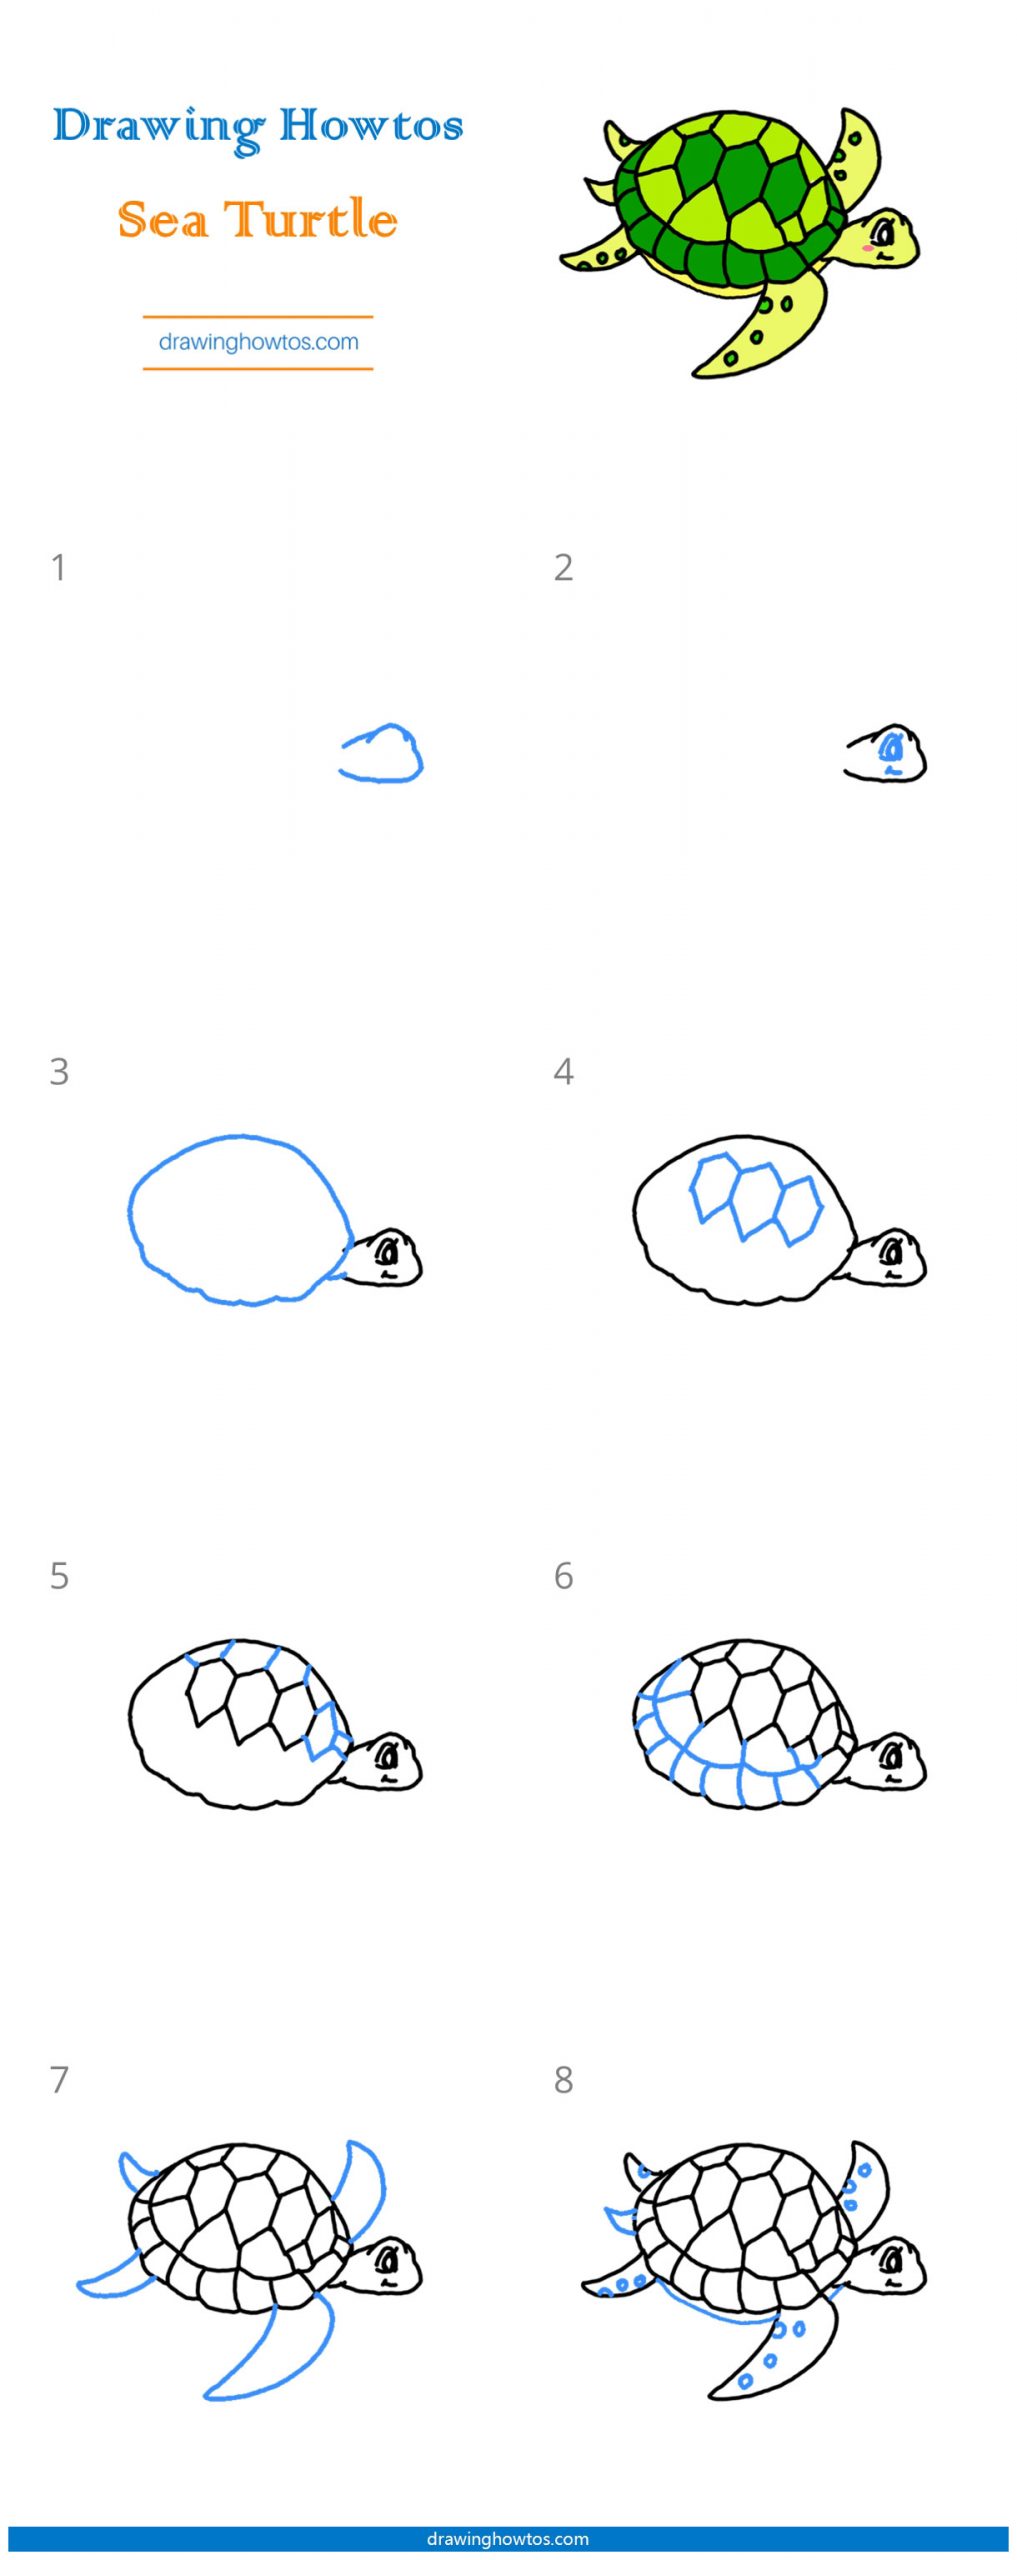 How to Draw a Sea Turtle Step by Step Easy Drawing Guides Drawing